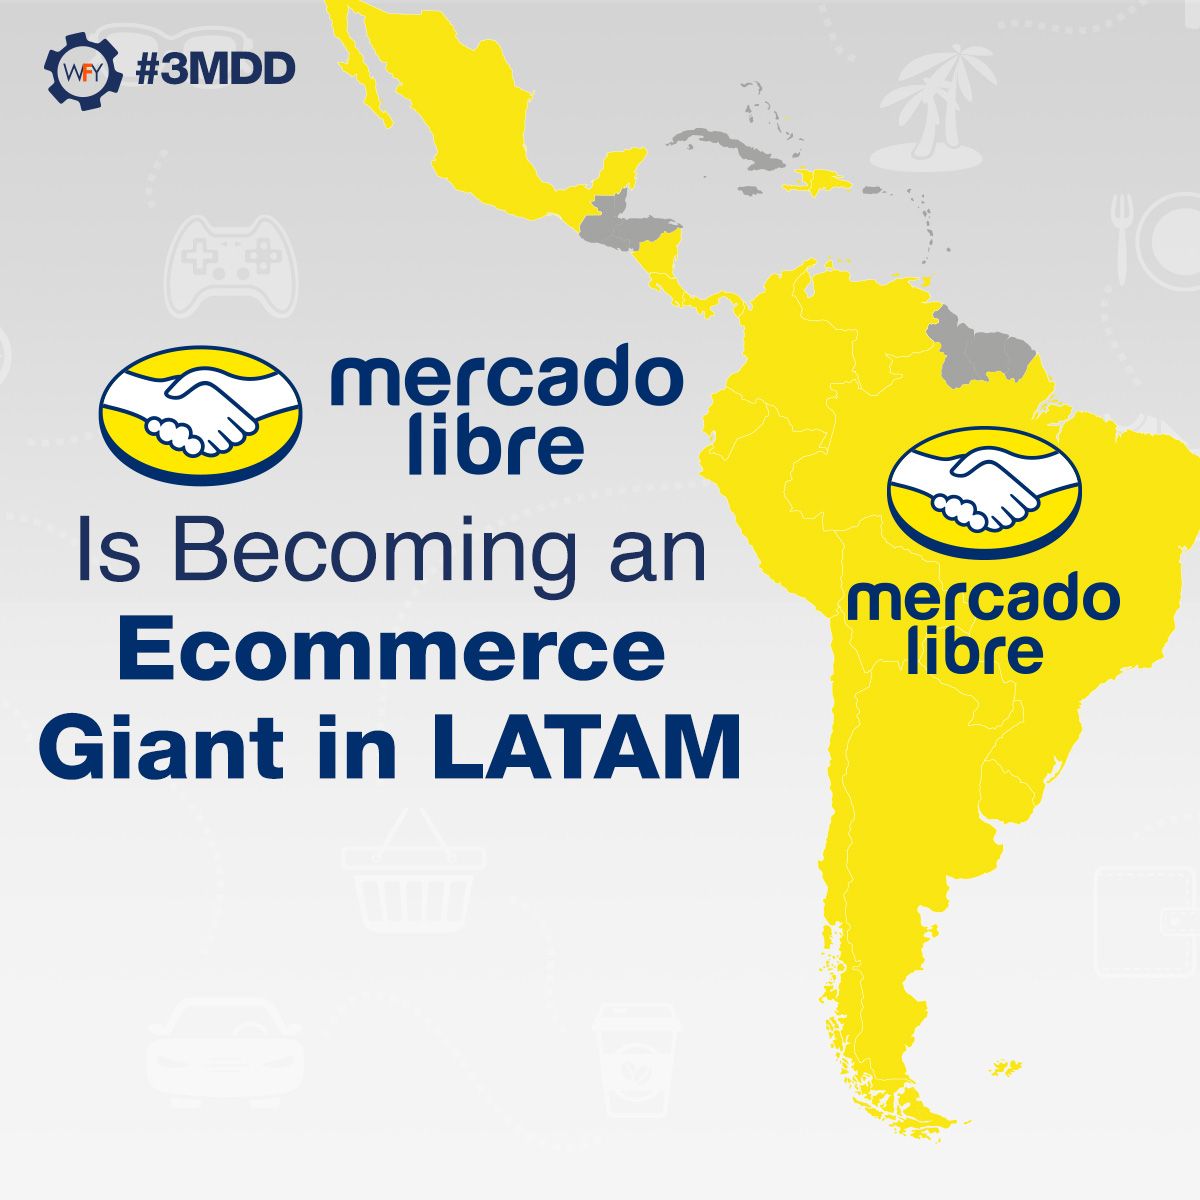 Mercado Libre Is Becoming an Ecommerce Giant in LATAM